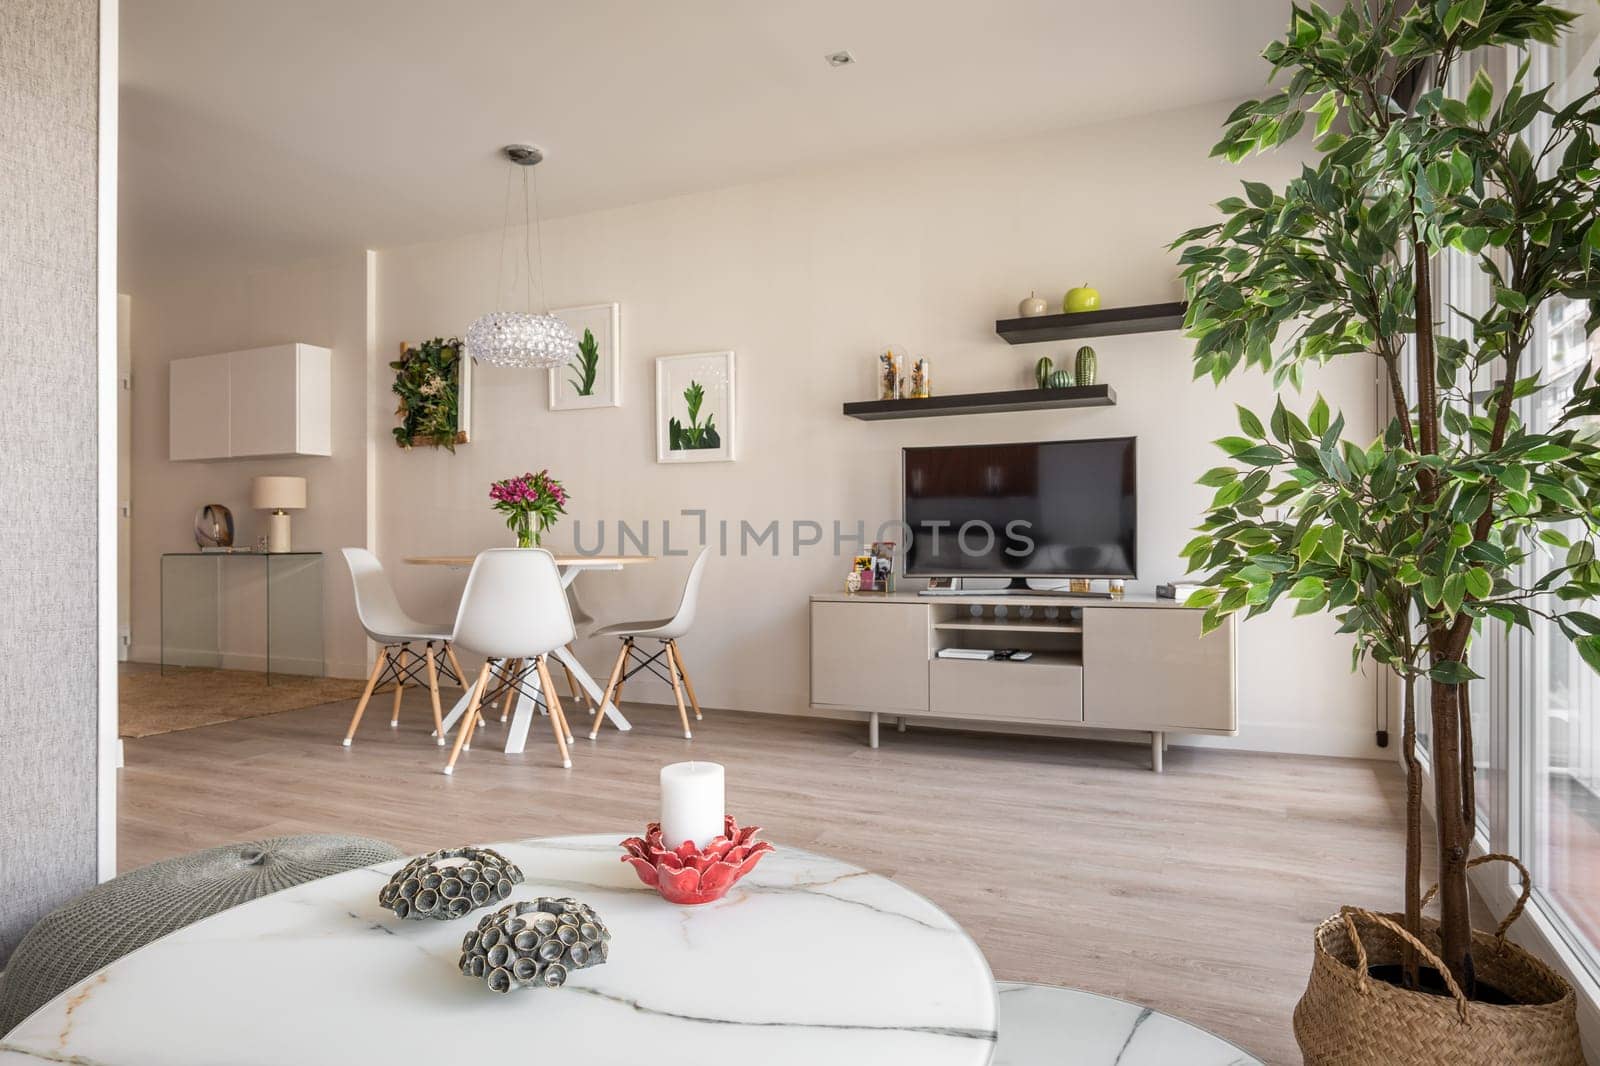 Modern interior in a compact apartment with a spacious combined living room with table, chairs and decorative accessories overlooking the TV and coffee table. Cozy city apartment.